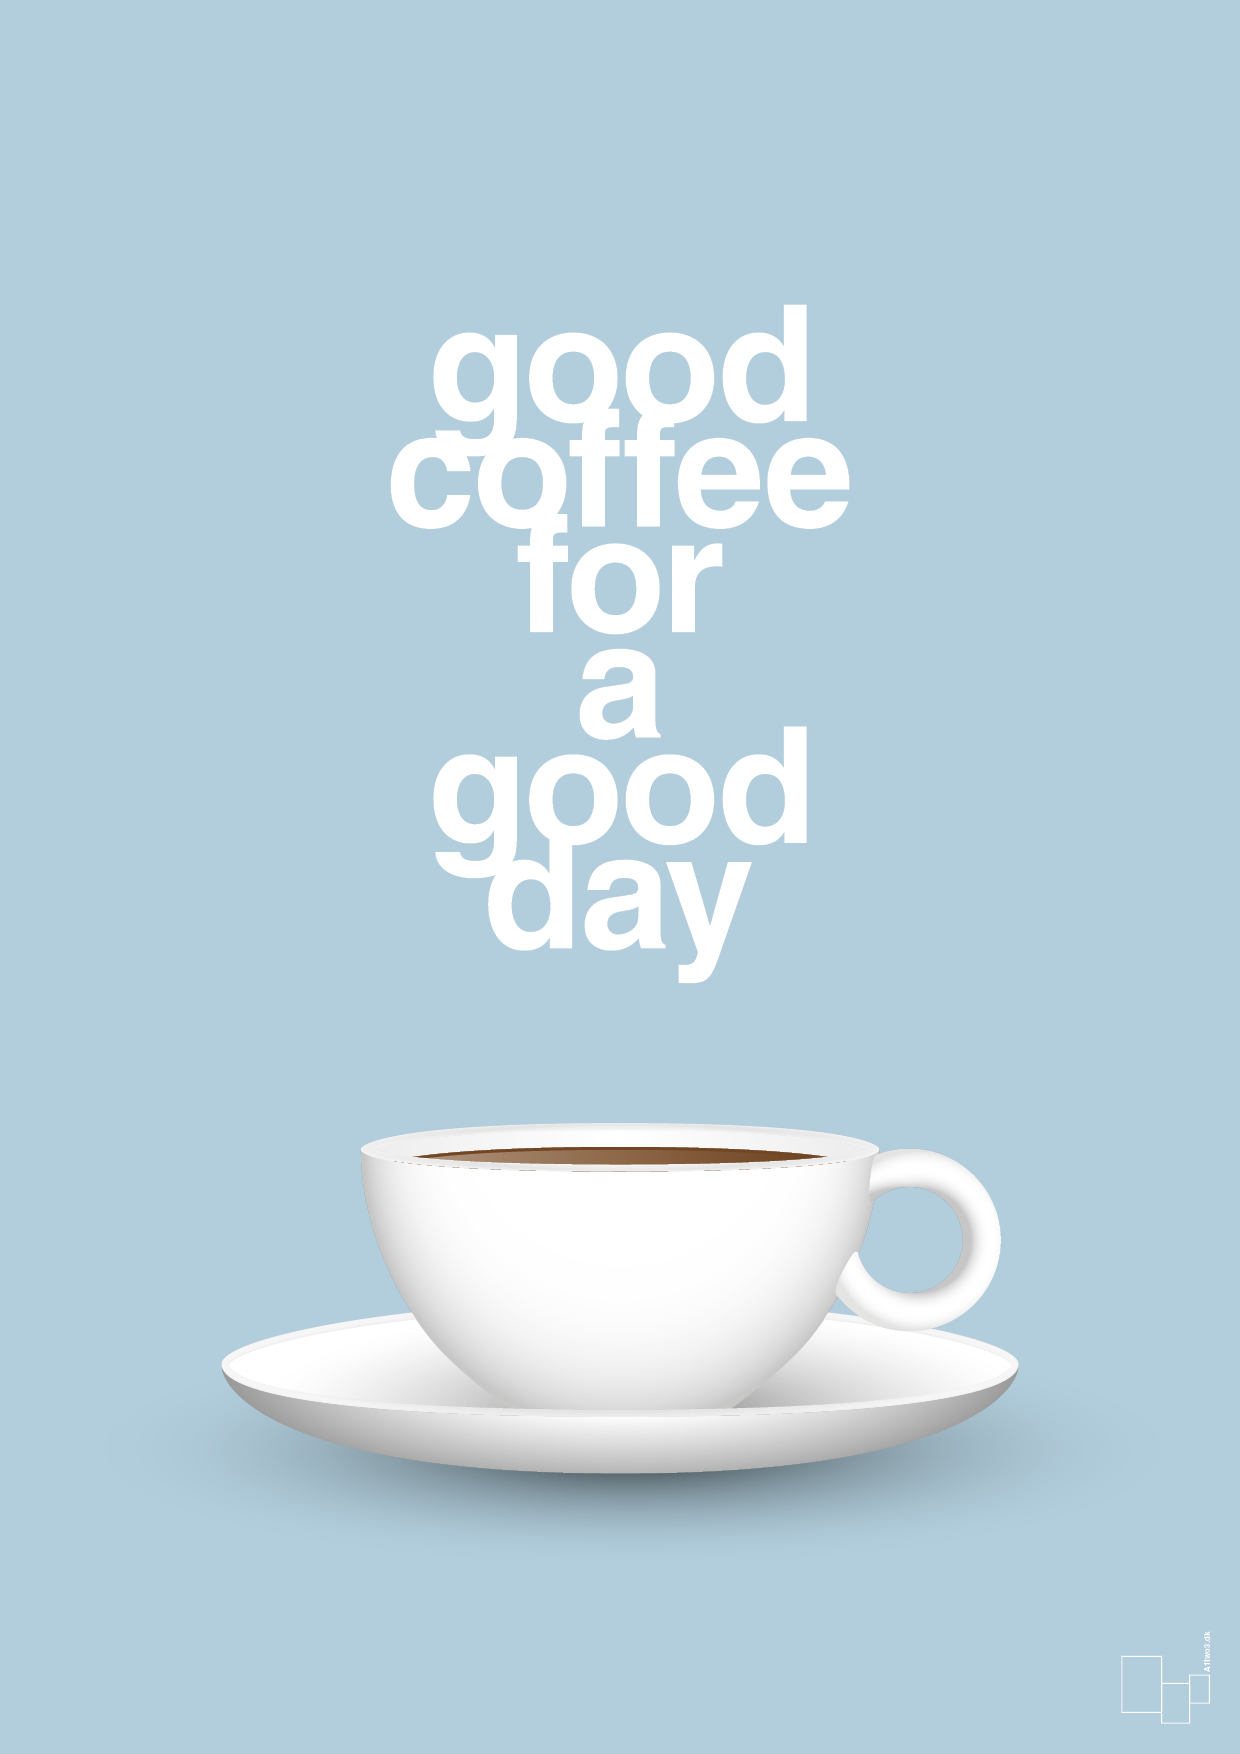 good coffee for a good day - Plakat med Mad & Drikke i Heavenly Blue